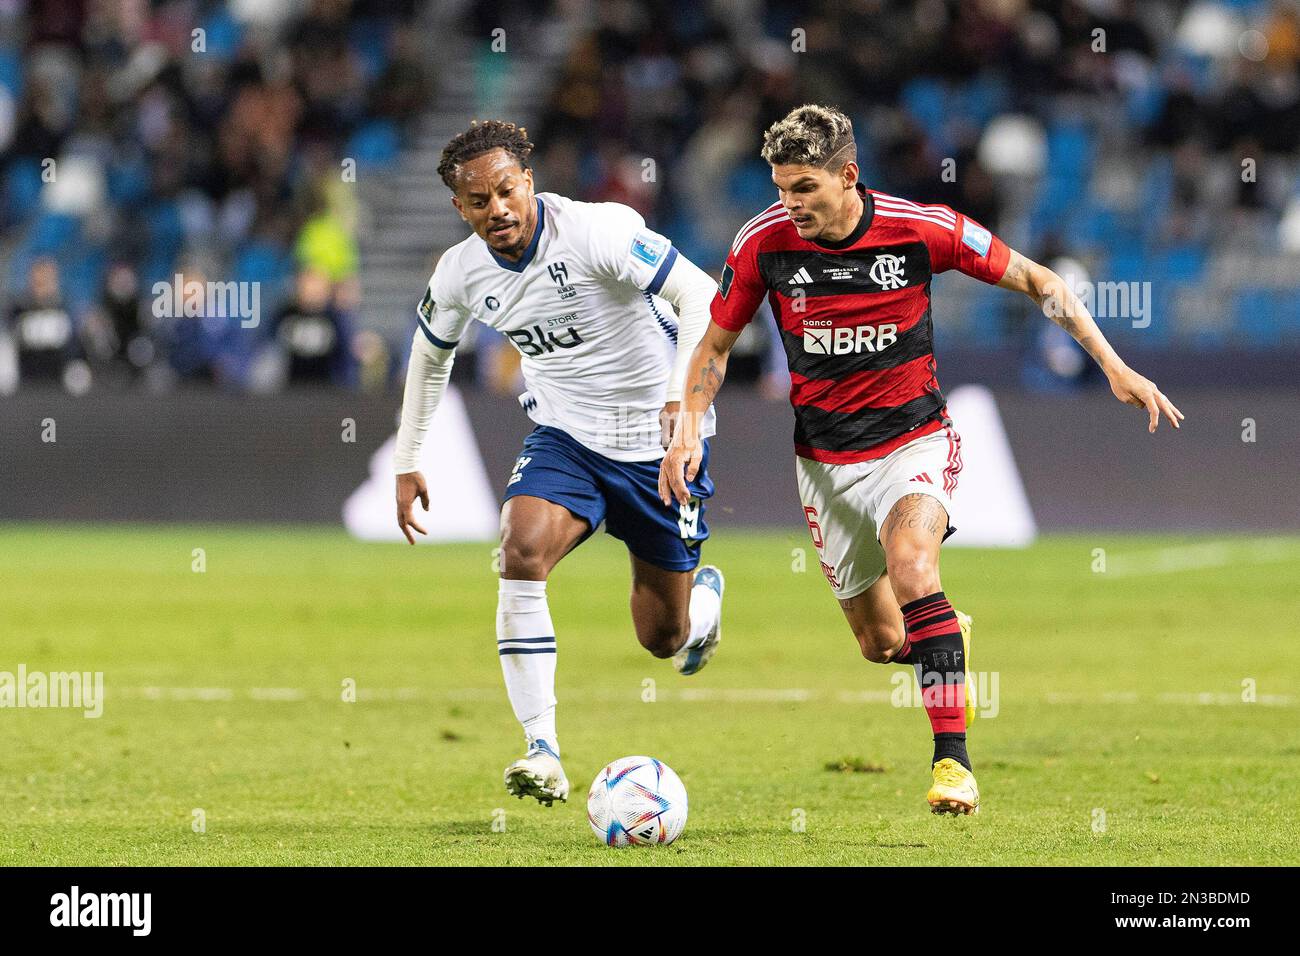 Tangier, Morocco. 07th Feb, 2023. Grand Stade of Tangier Andre Carrillo of Al Hilal and Ayrton of Flamengo during the match between Flamengo x Al Hilal, valid for the semi-final of the 2022 FIFA Club World Cup, held at the Grand Stade of Tangier in Tangier, TT. (Richard Callis/SPP) Credit: SPP Sport Press Photo. /Alamy Live News Stock Photo